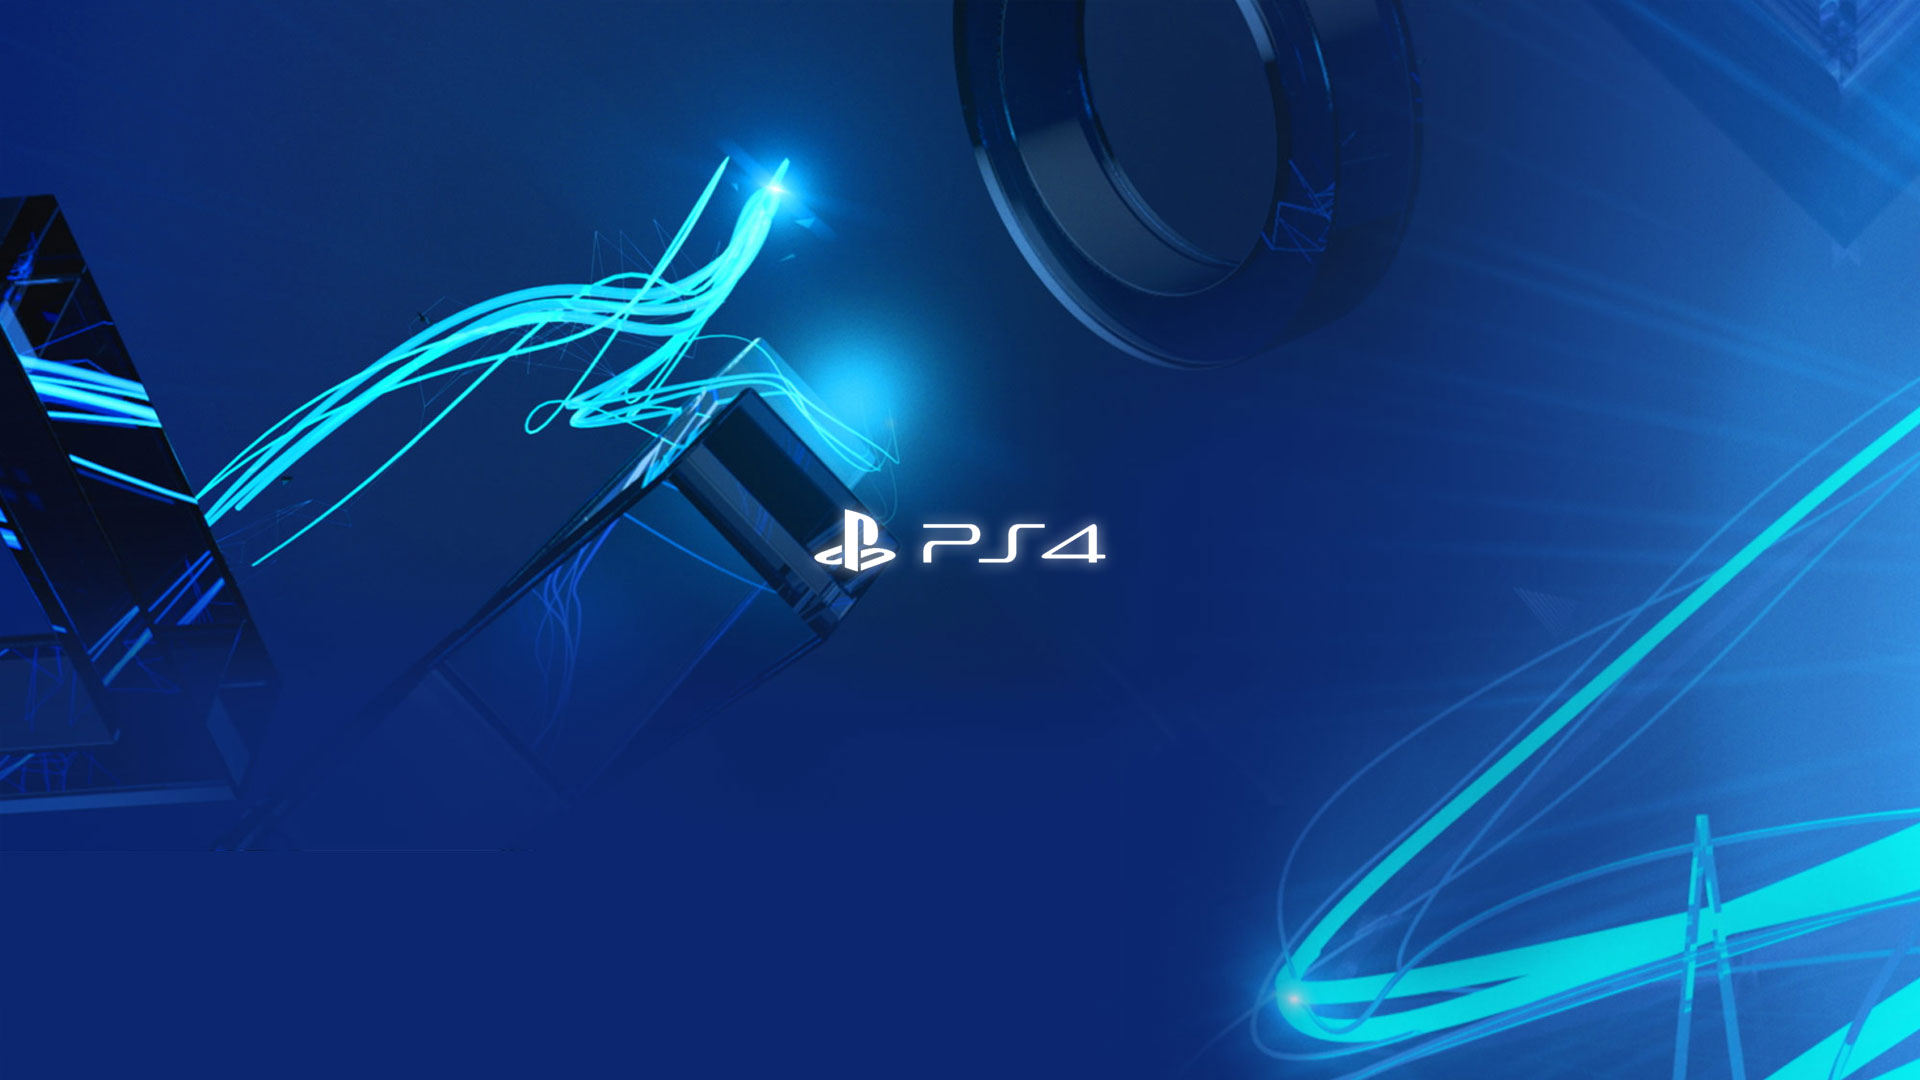 Sony Playstation 4 Wallpapers Pictures Images HD Wallpapers Download Free Images Wallpaper [wallpaper981.blogspot.com]